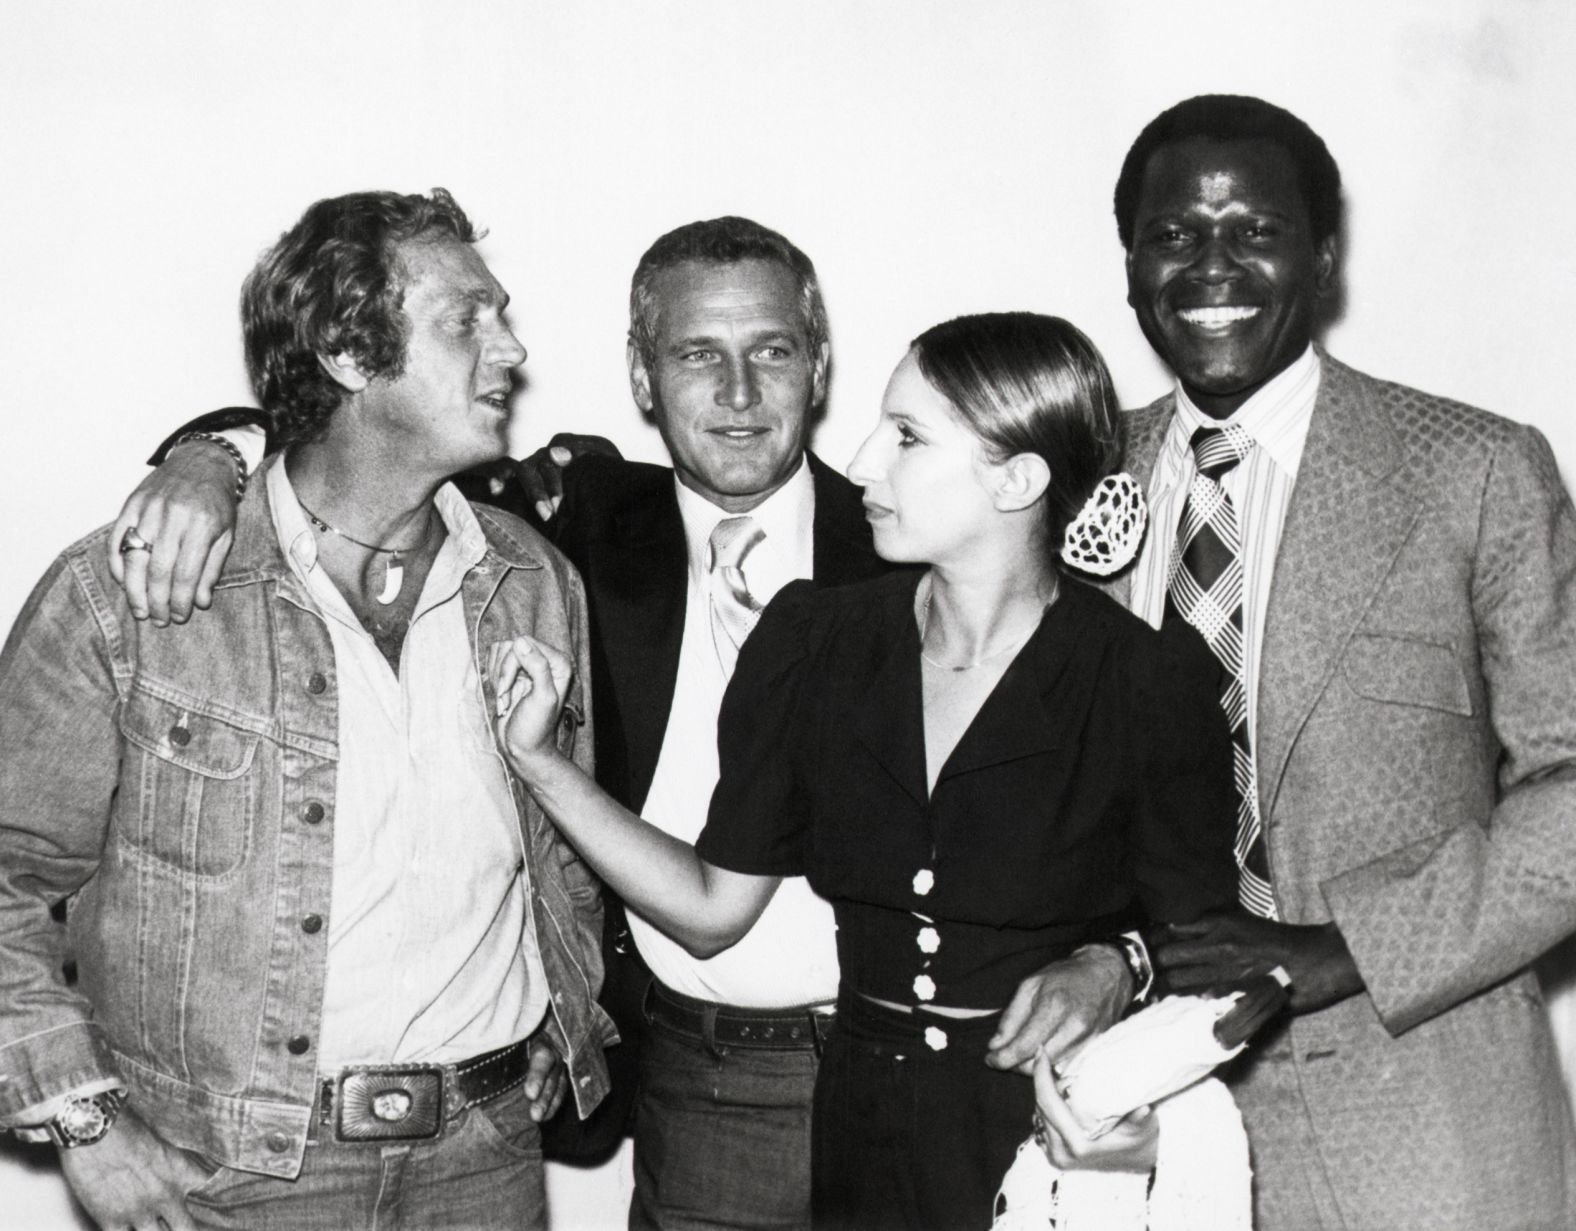 From left, Steve McQueen, Paul Newman, Streisand and Sidney Poitier attend a meeting for their production company, First Artists, in 1972. The company, which began with the mission of giving actors more creative control, shut down in 1980.